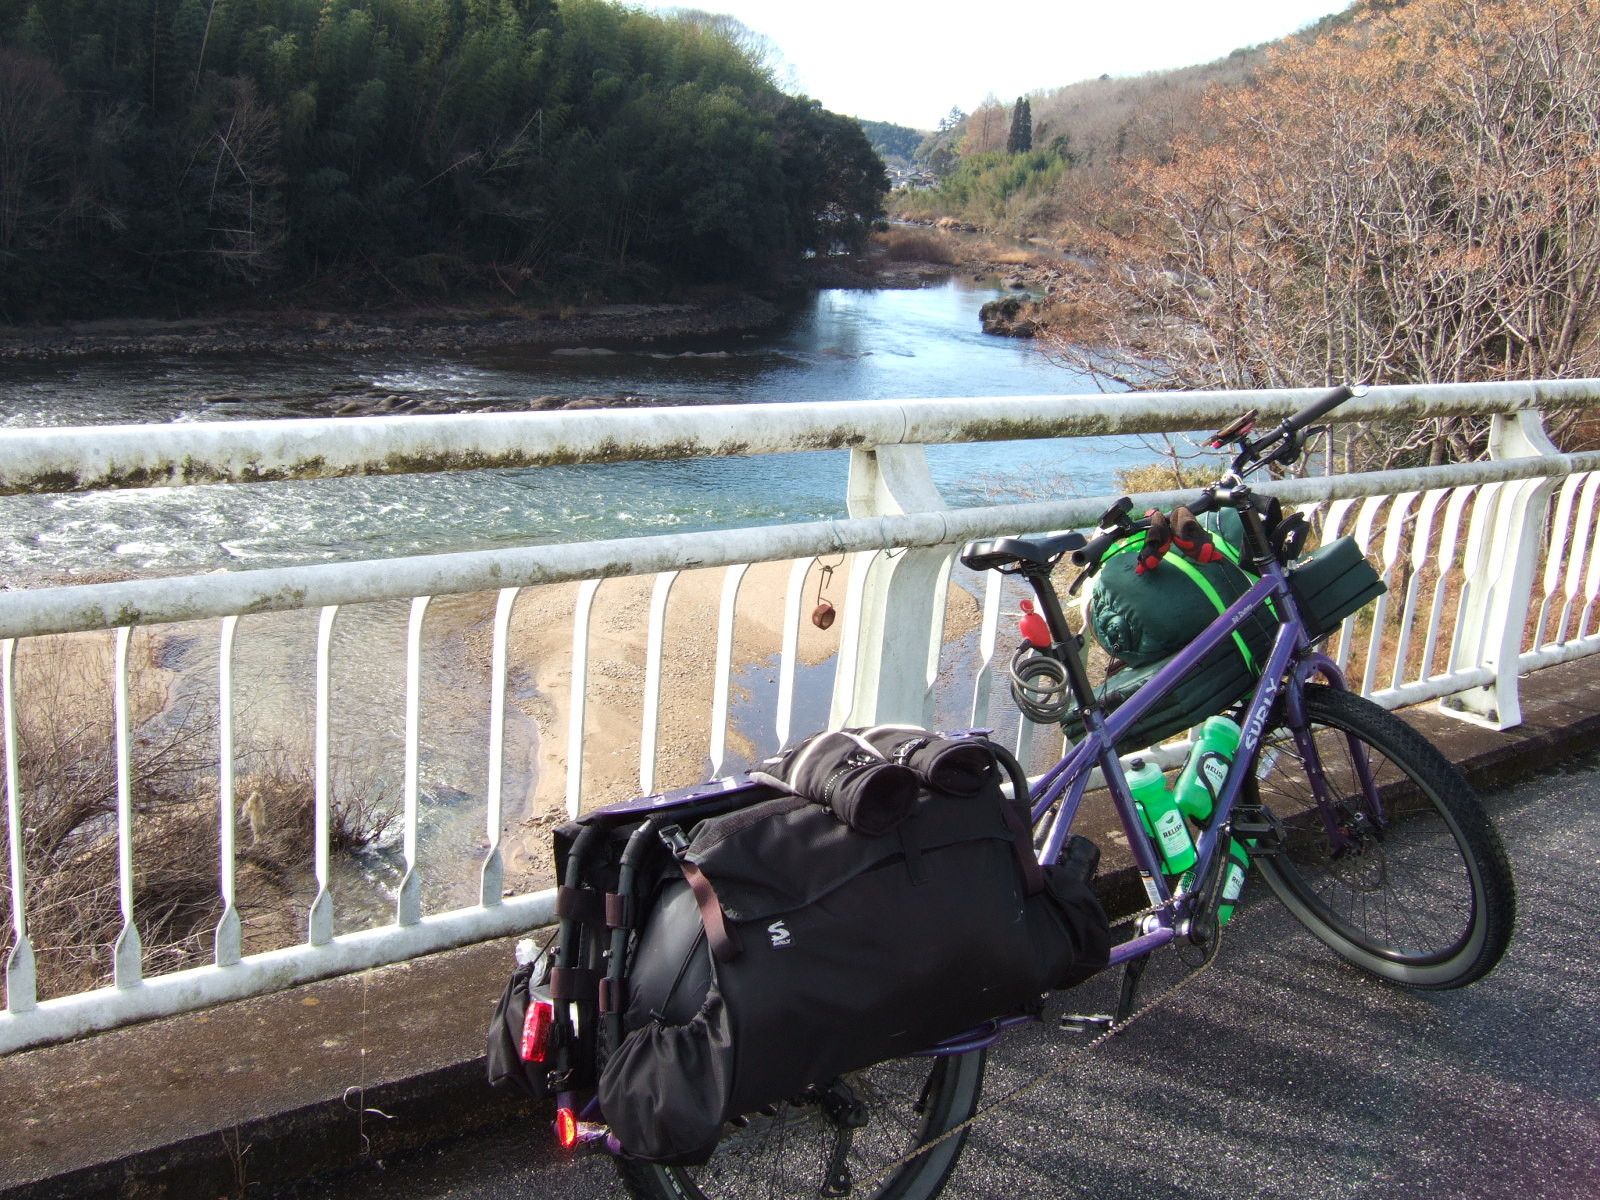 A loaded cargo bike parked at a painted steel railing, overlooking the view of a river winding into the distance between wooded banks, with a small village visible very far down at a distant bend in the river.